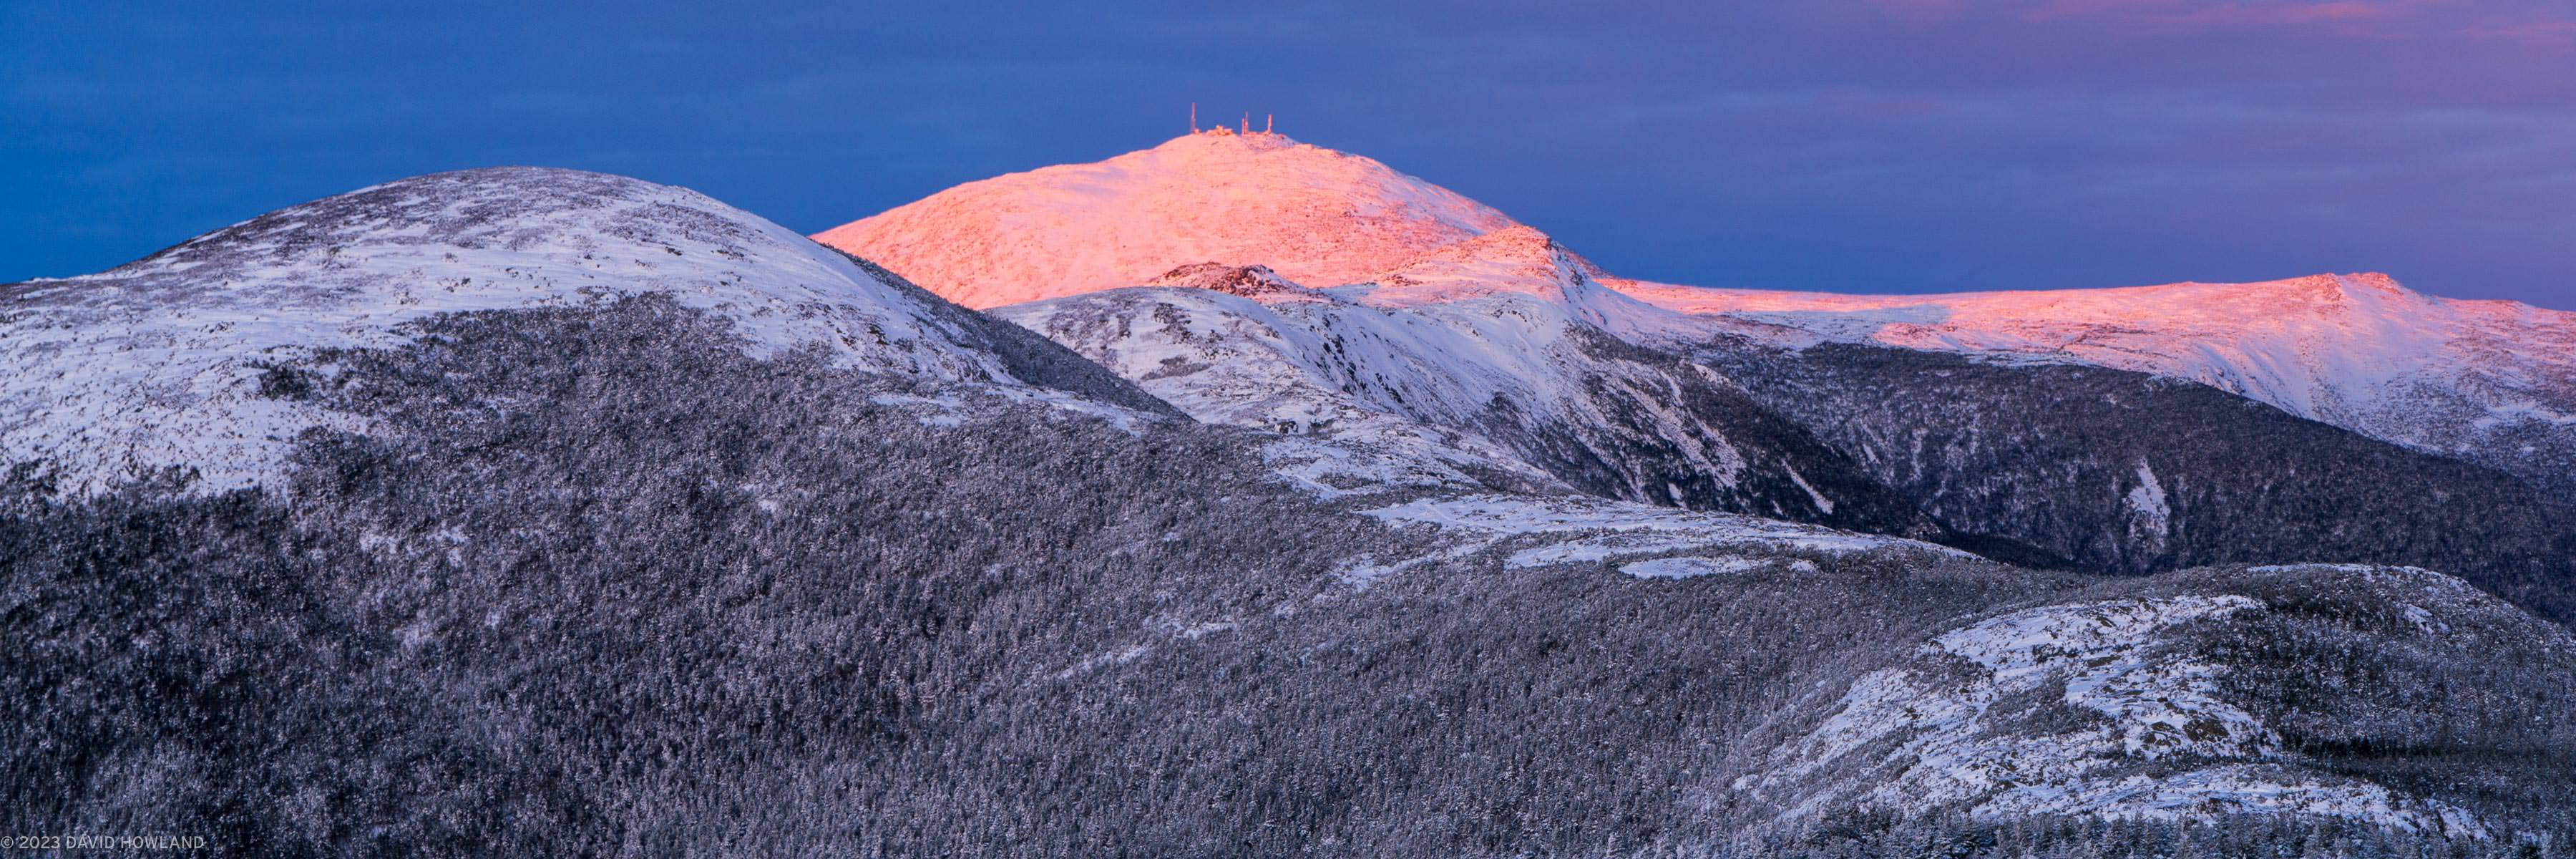 A panorama photo of orange alpenglow lighting up Mount Washington and the other peaks of the Presidential Range in the White Mountains of New Hampshire.